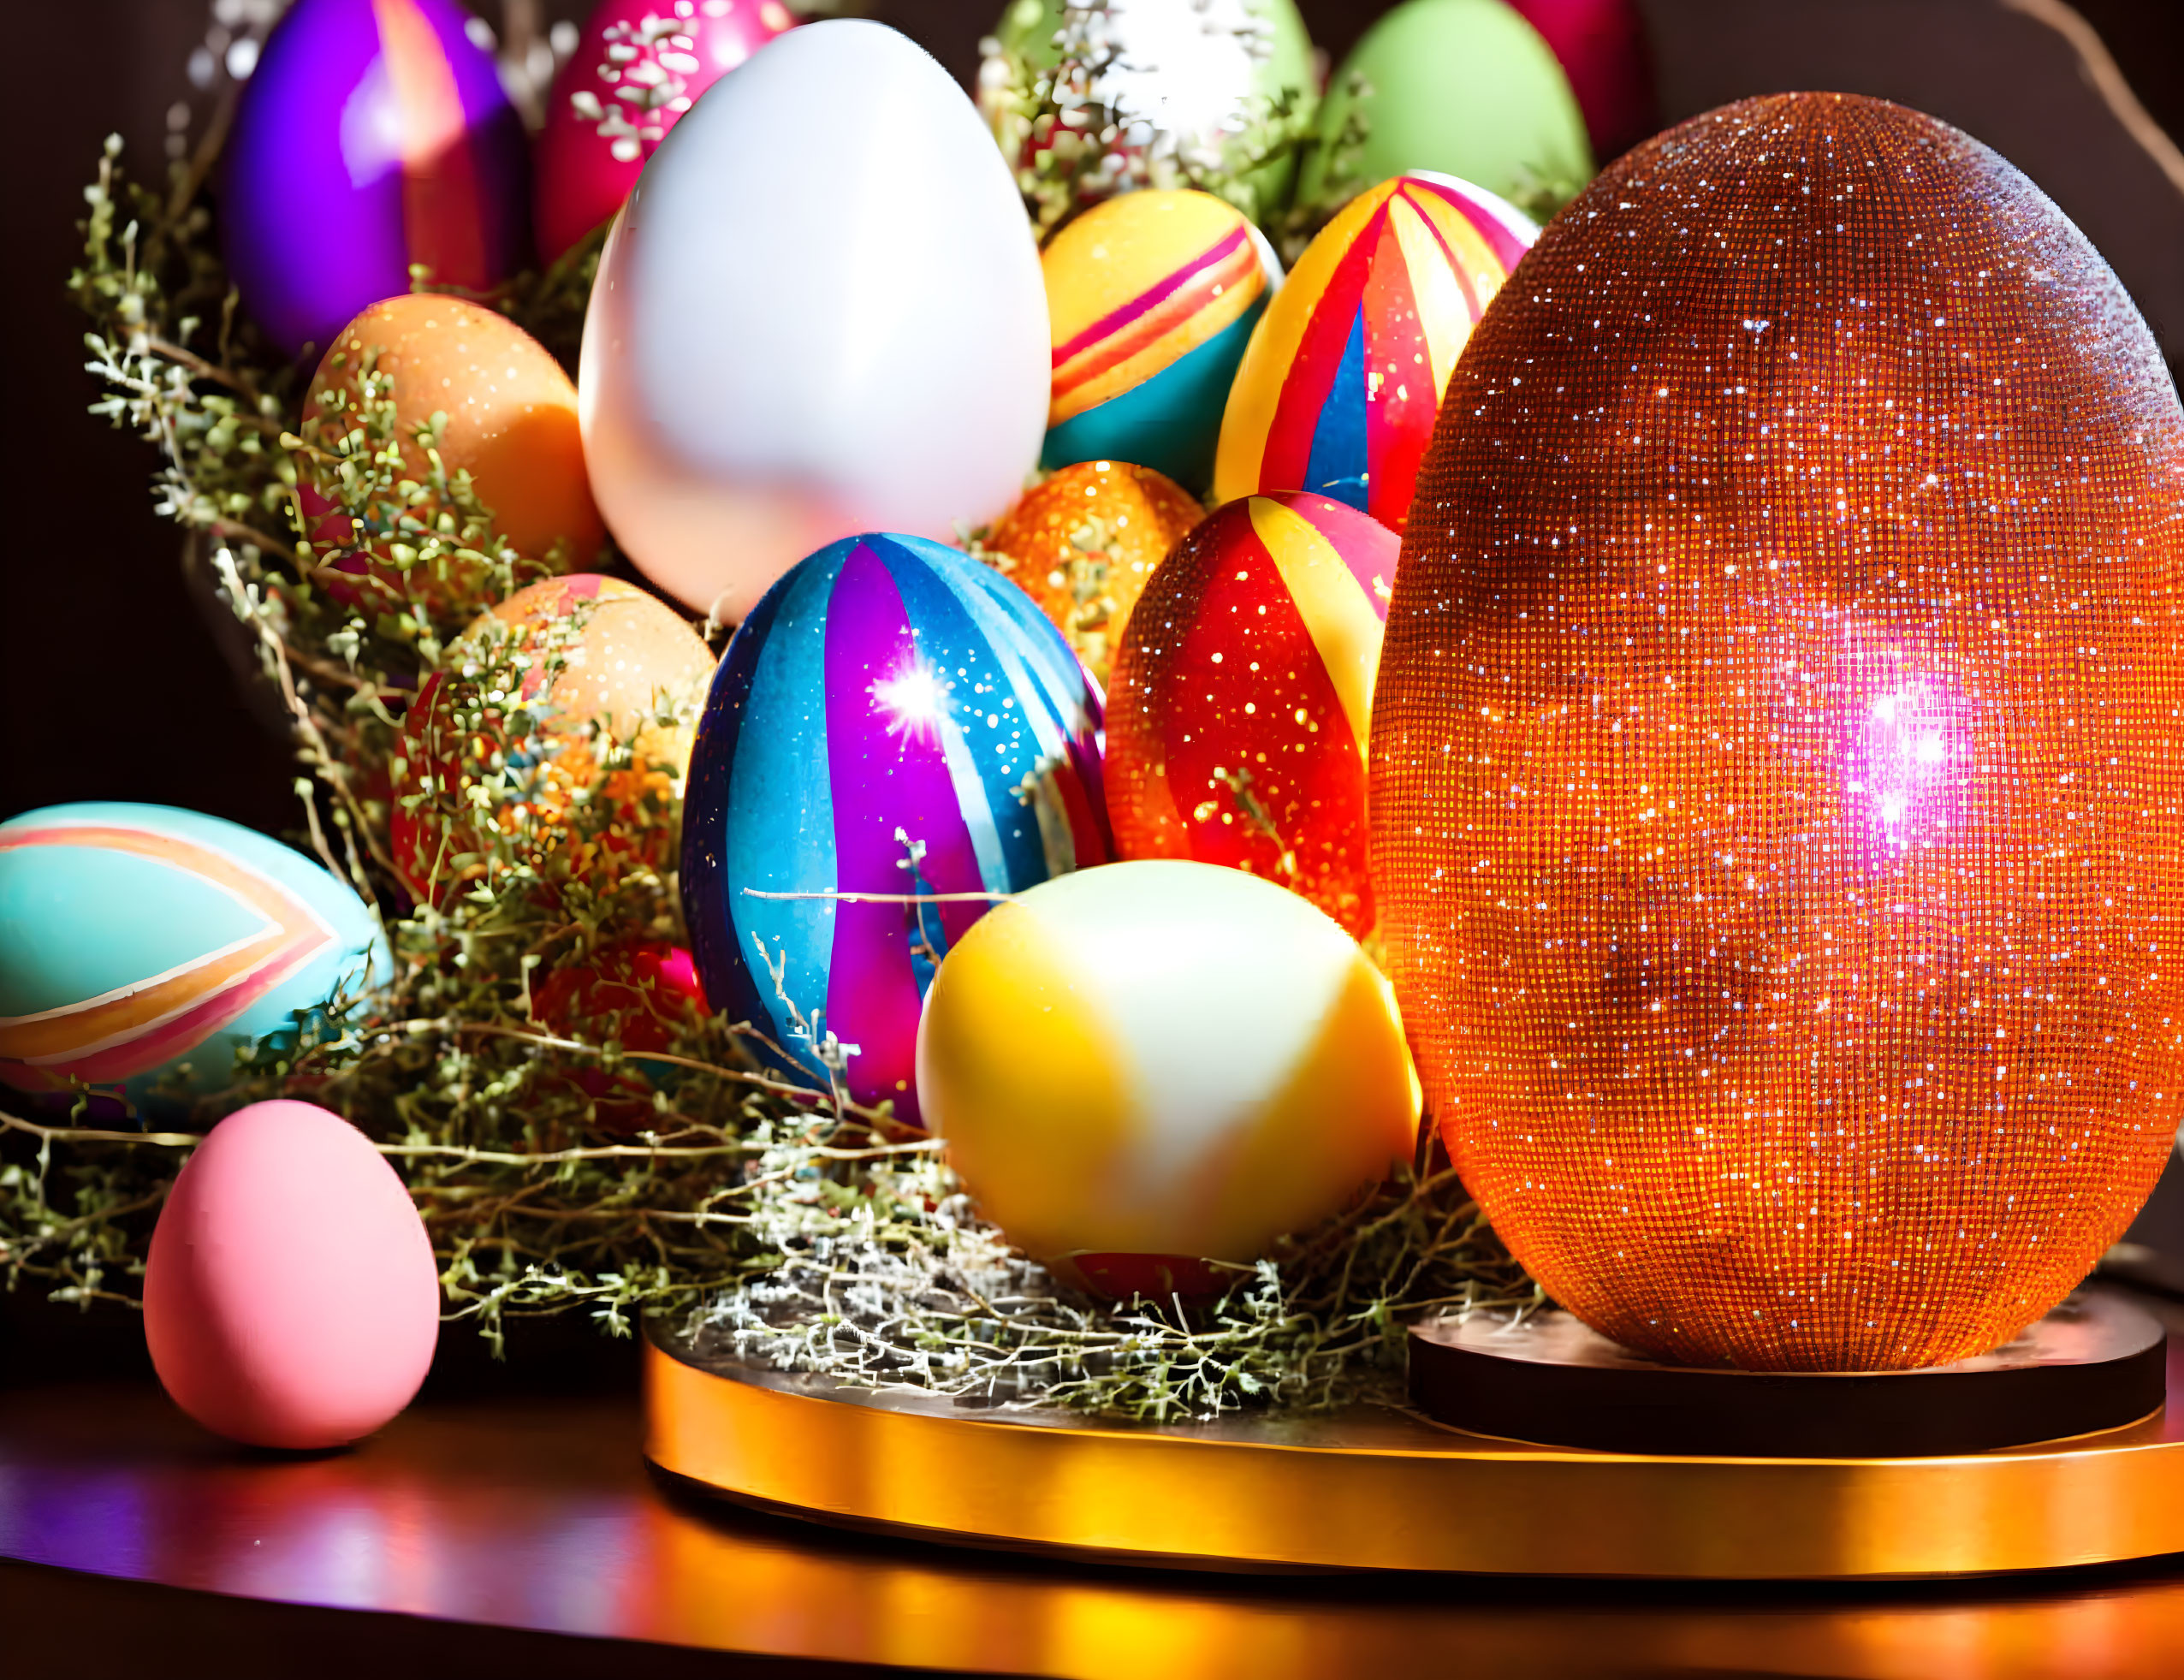 Vibrant Easter egg display with foliage and sparkling centerpiece